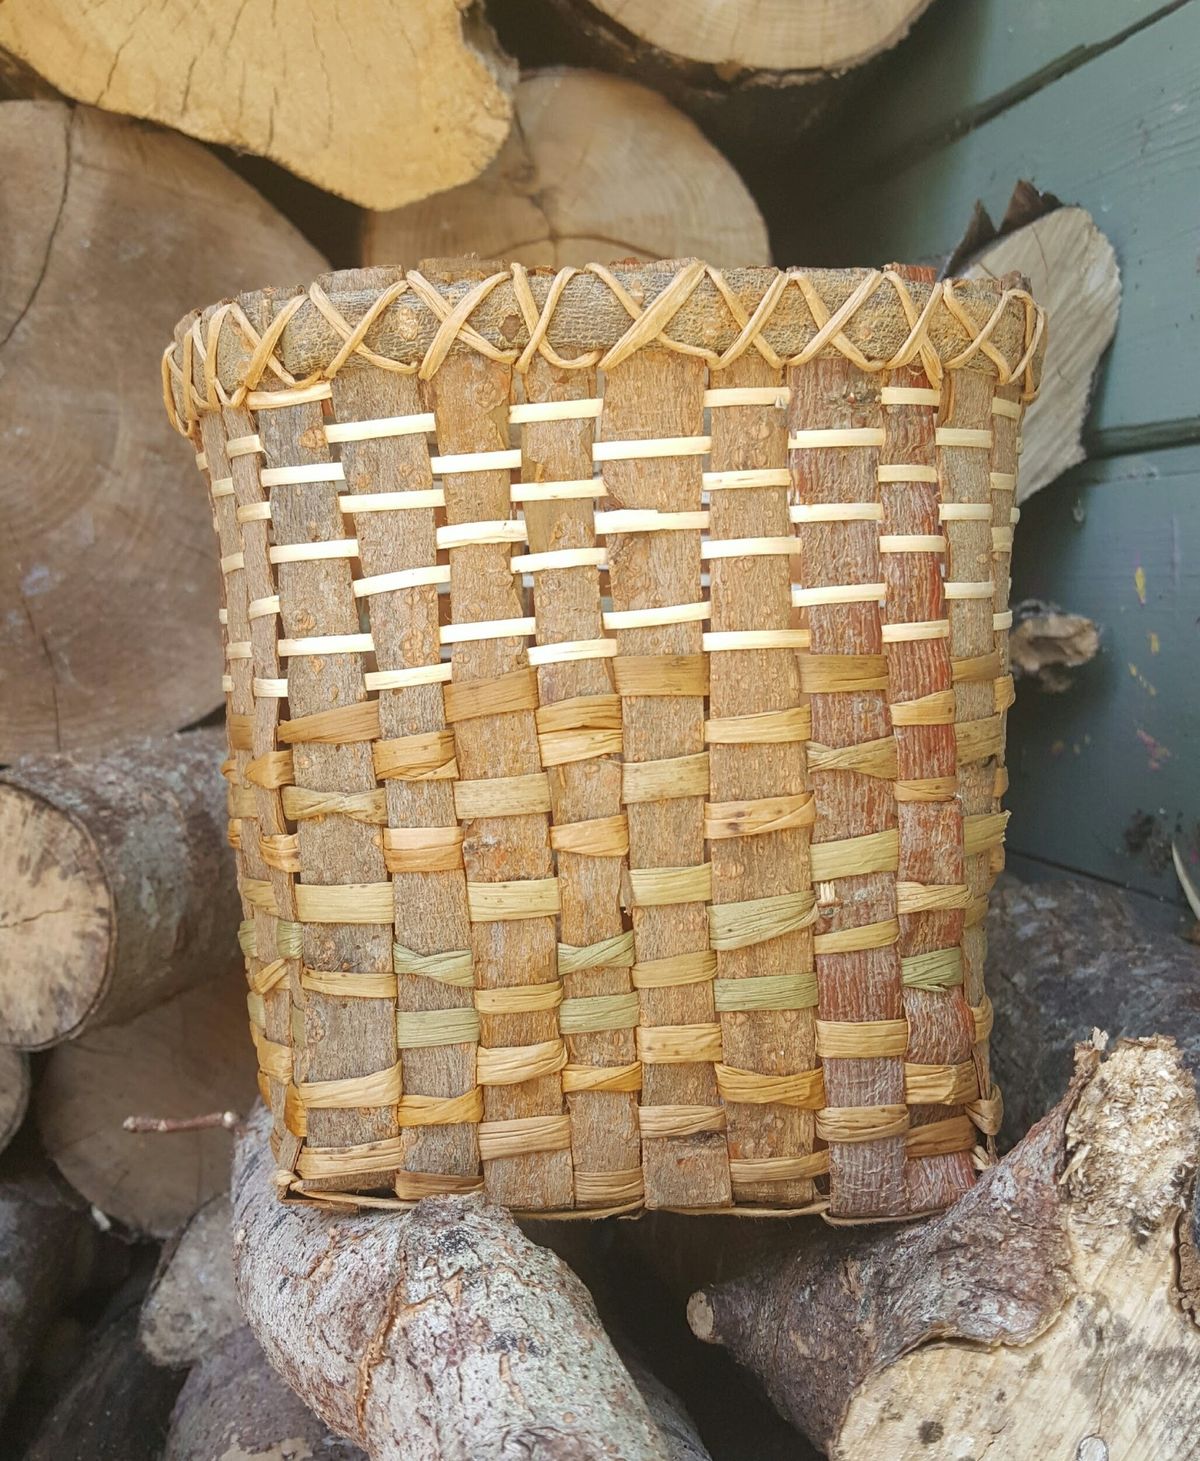 Bark & natural material containers workshop with Clare Revera